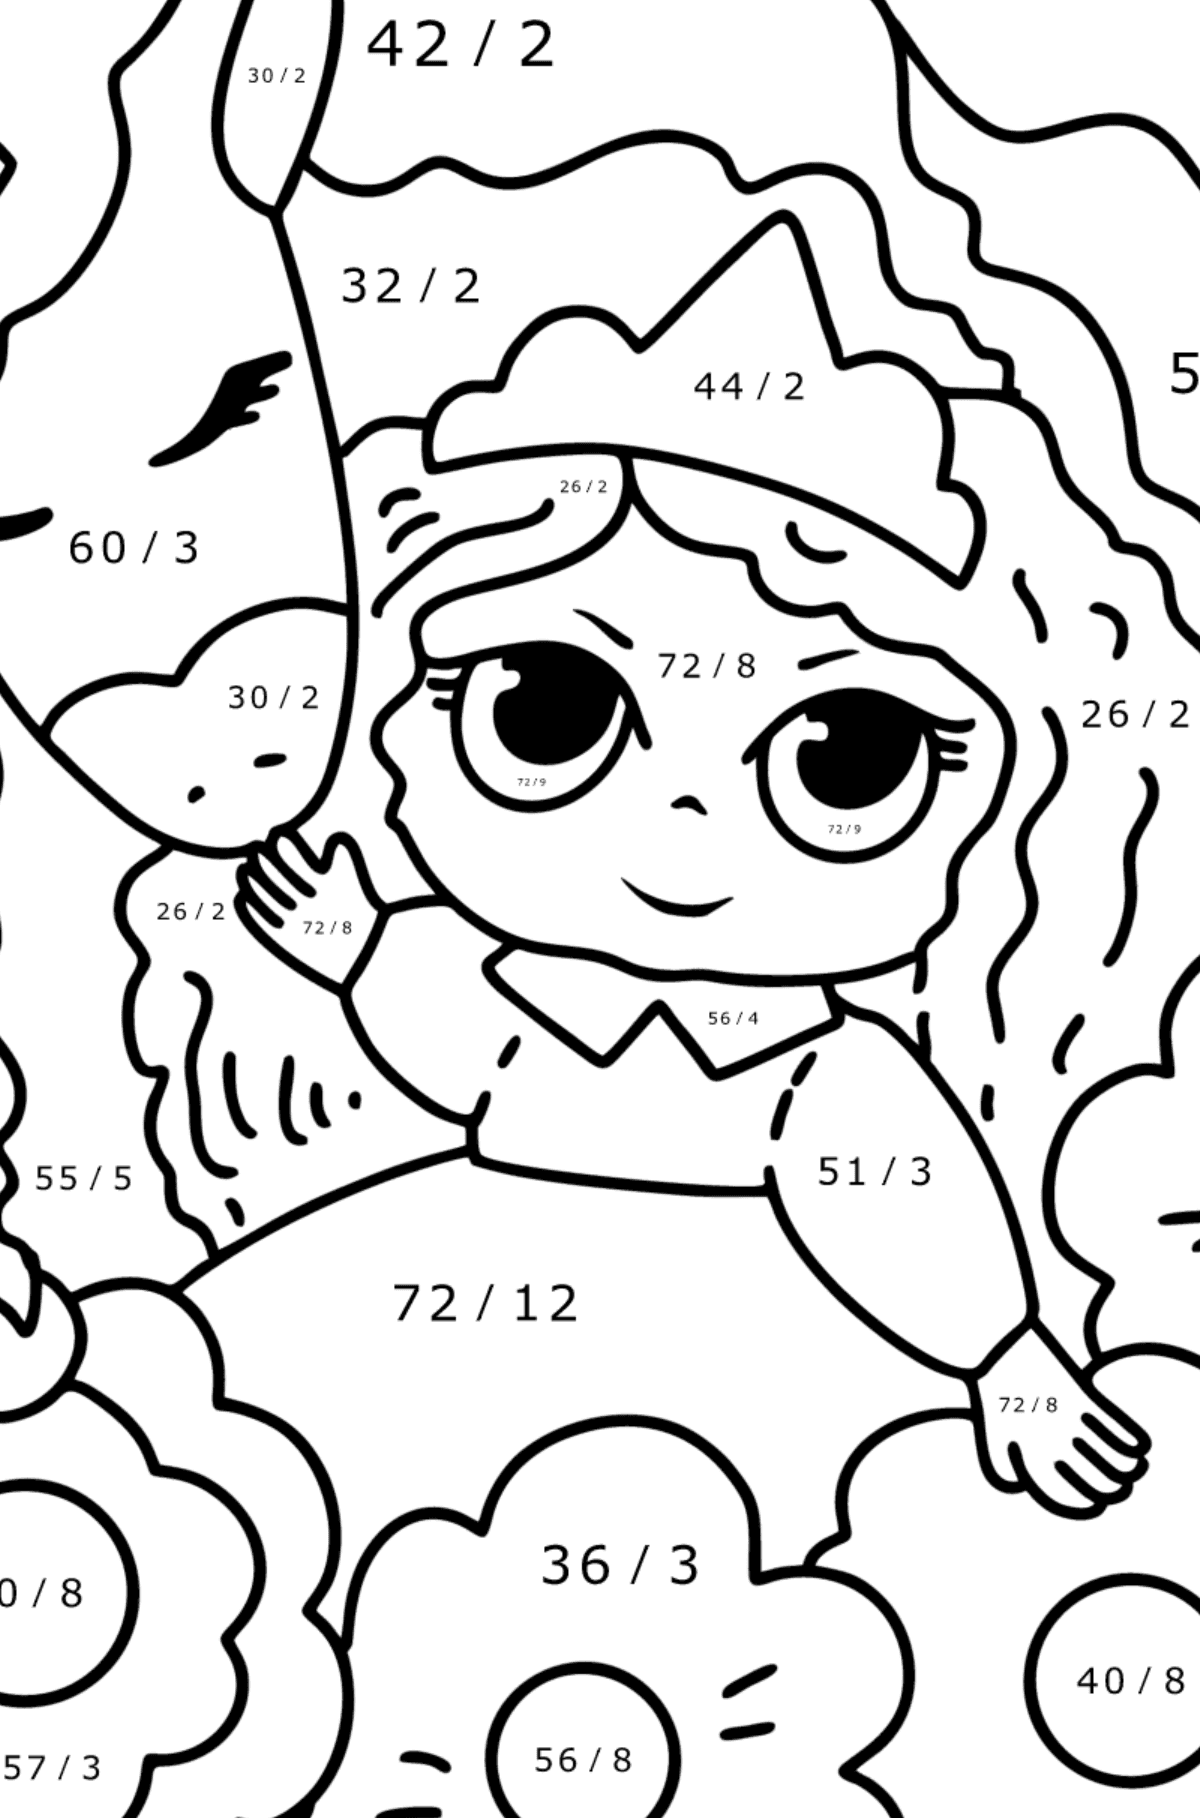 Magical unicorn and princess coloring page - Math Coloring - Division for Kids